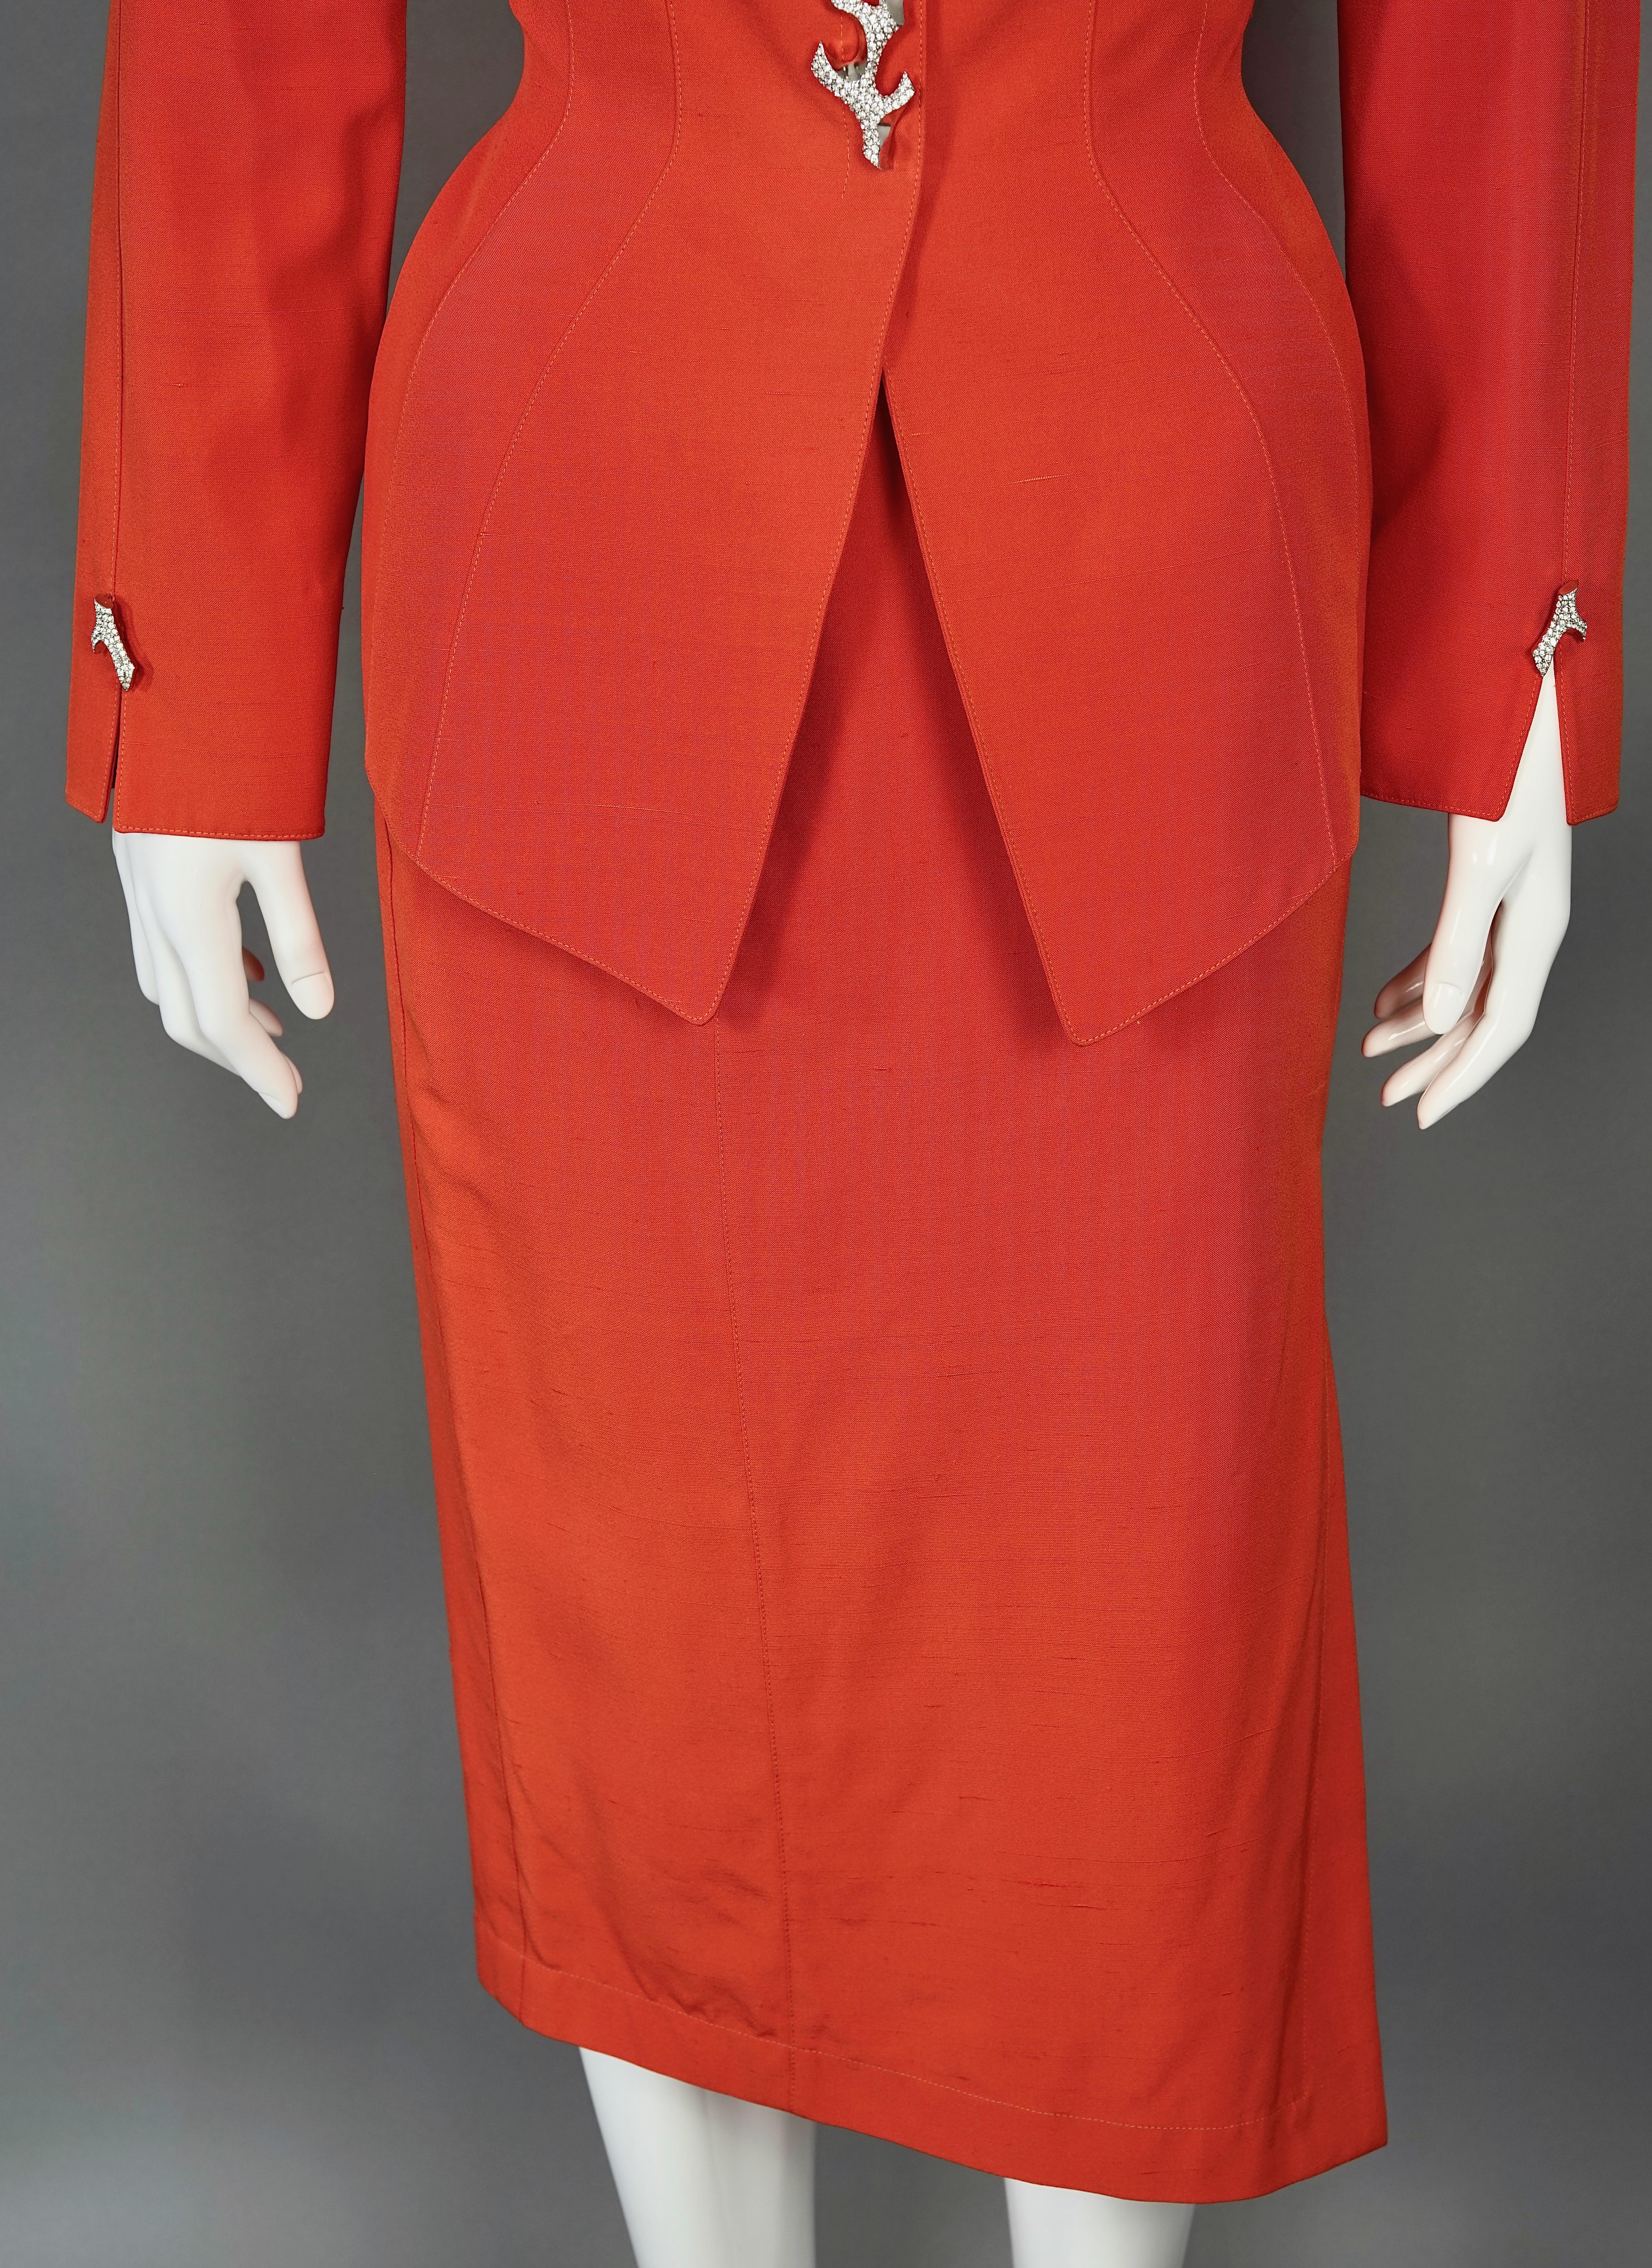 Vintage THIERRY MUGLER Jeweled Coral Button Orange Jacket Skirt Suit For Sale 1